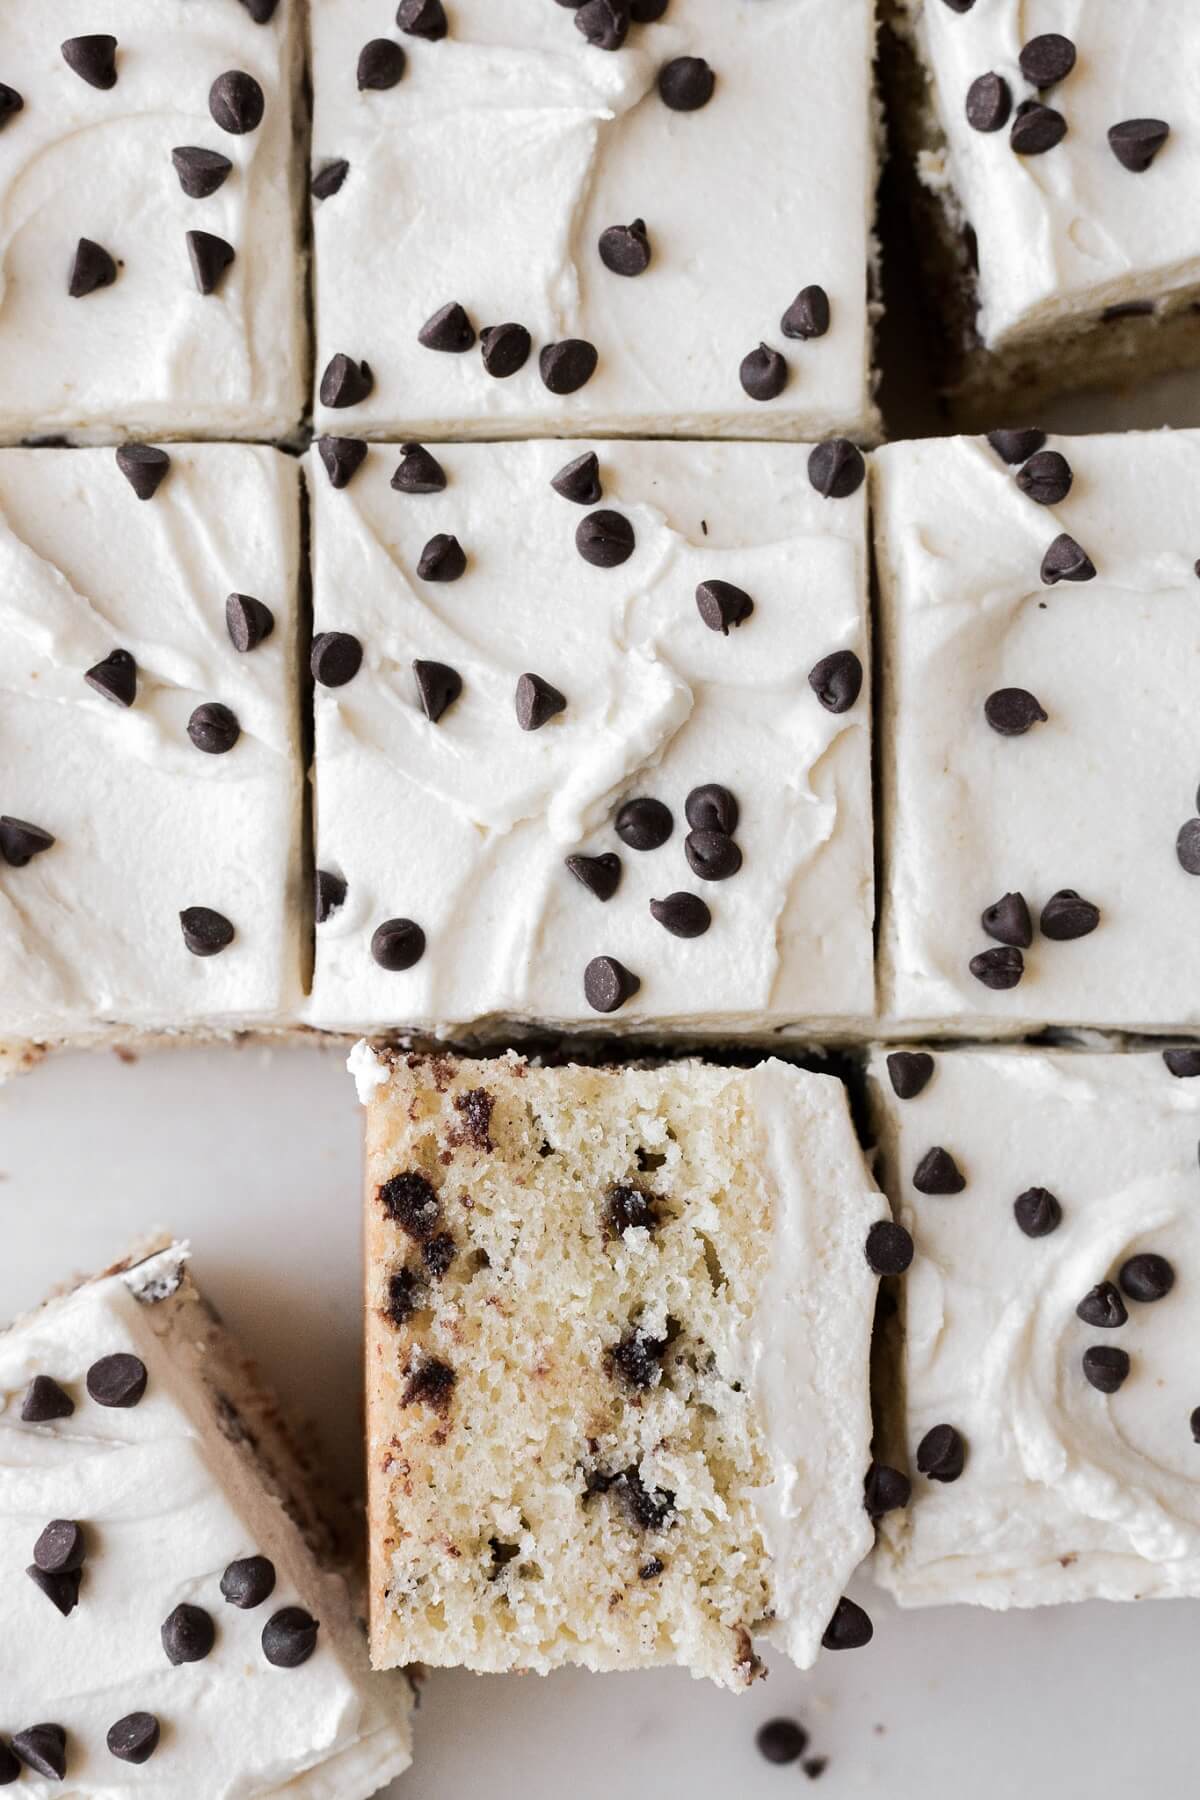 Chocolate chip sheet cake sprinkled with mini chocolate chips.